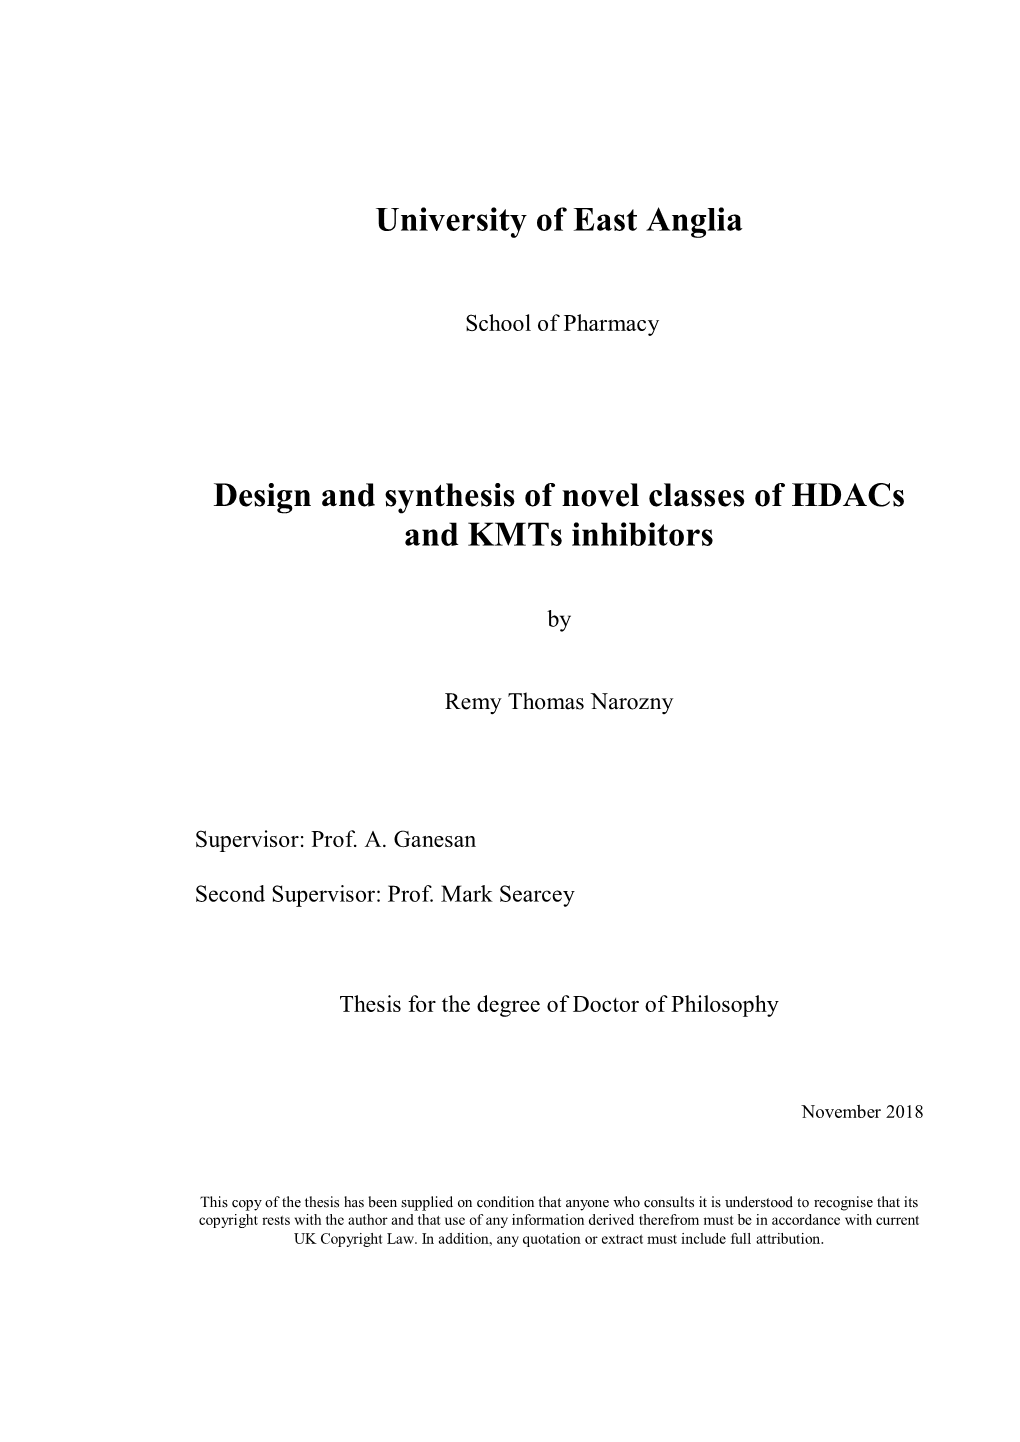 Design and Synthesis of Novel Classes of Hdacs and Kmts Inhibitors